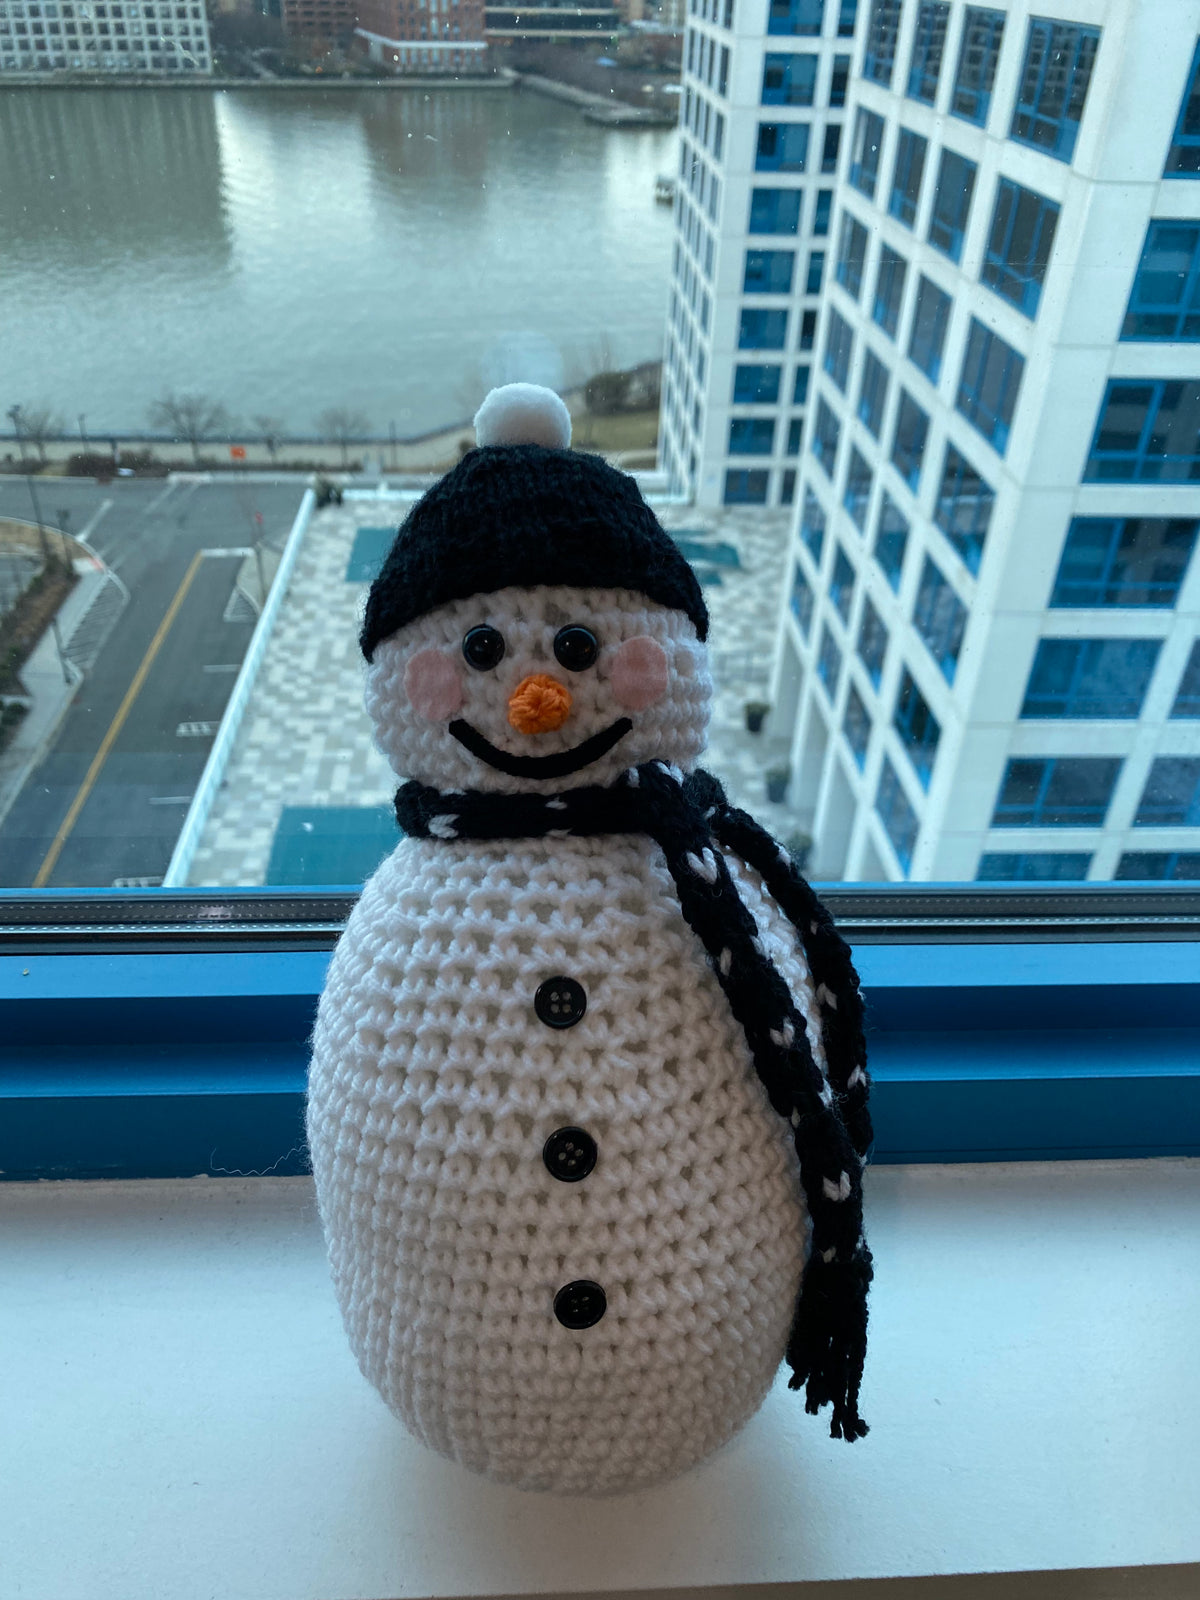 Cute crocheted snowman with black beanie and black scarf with hearts on it